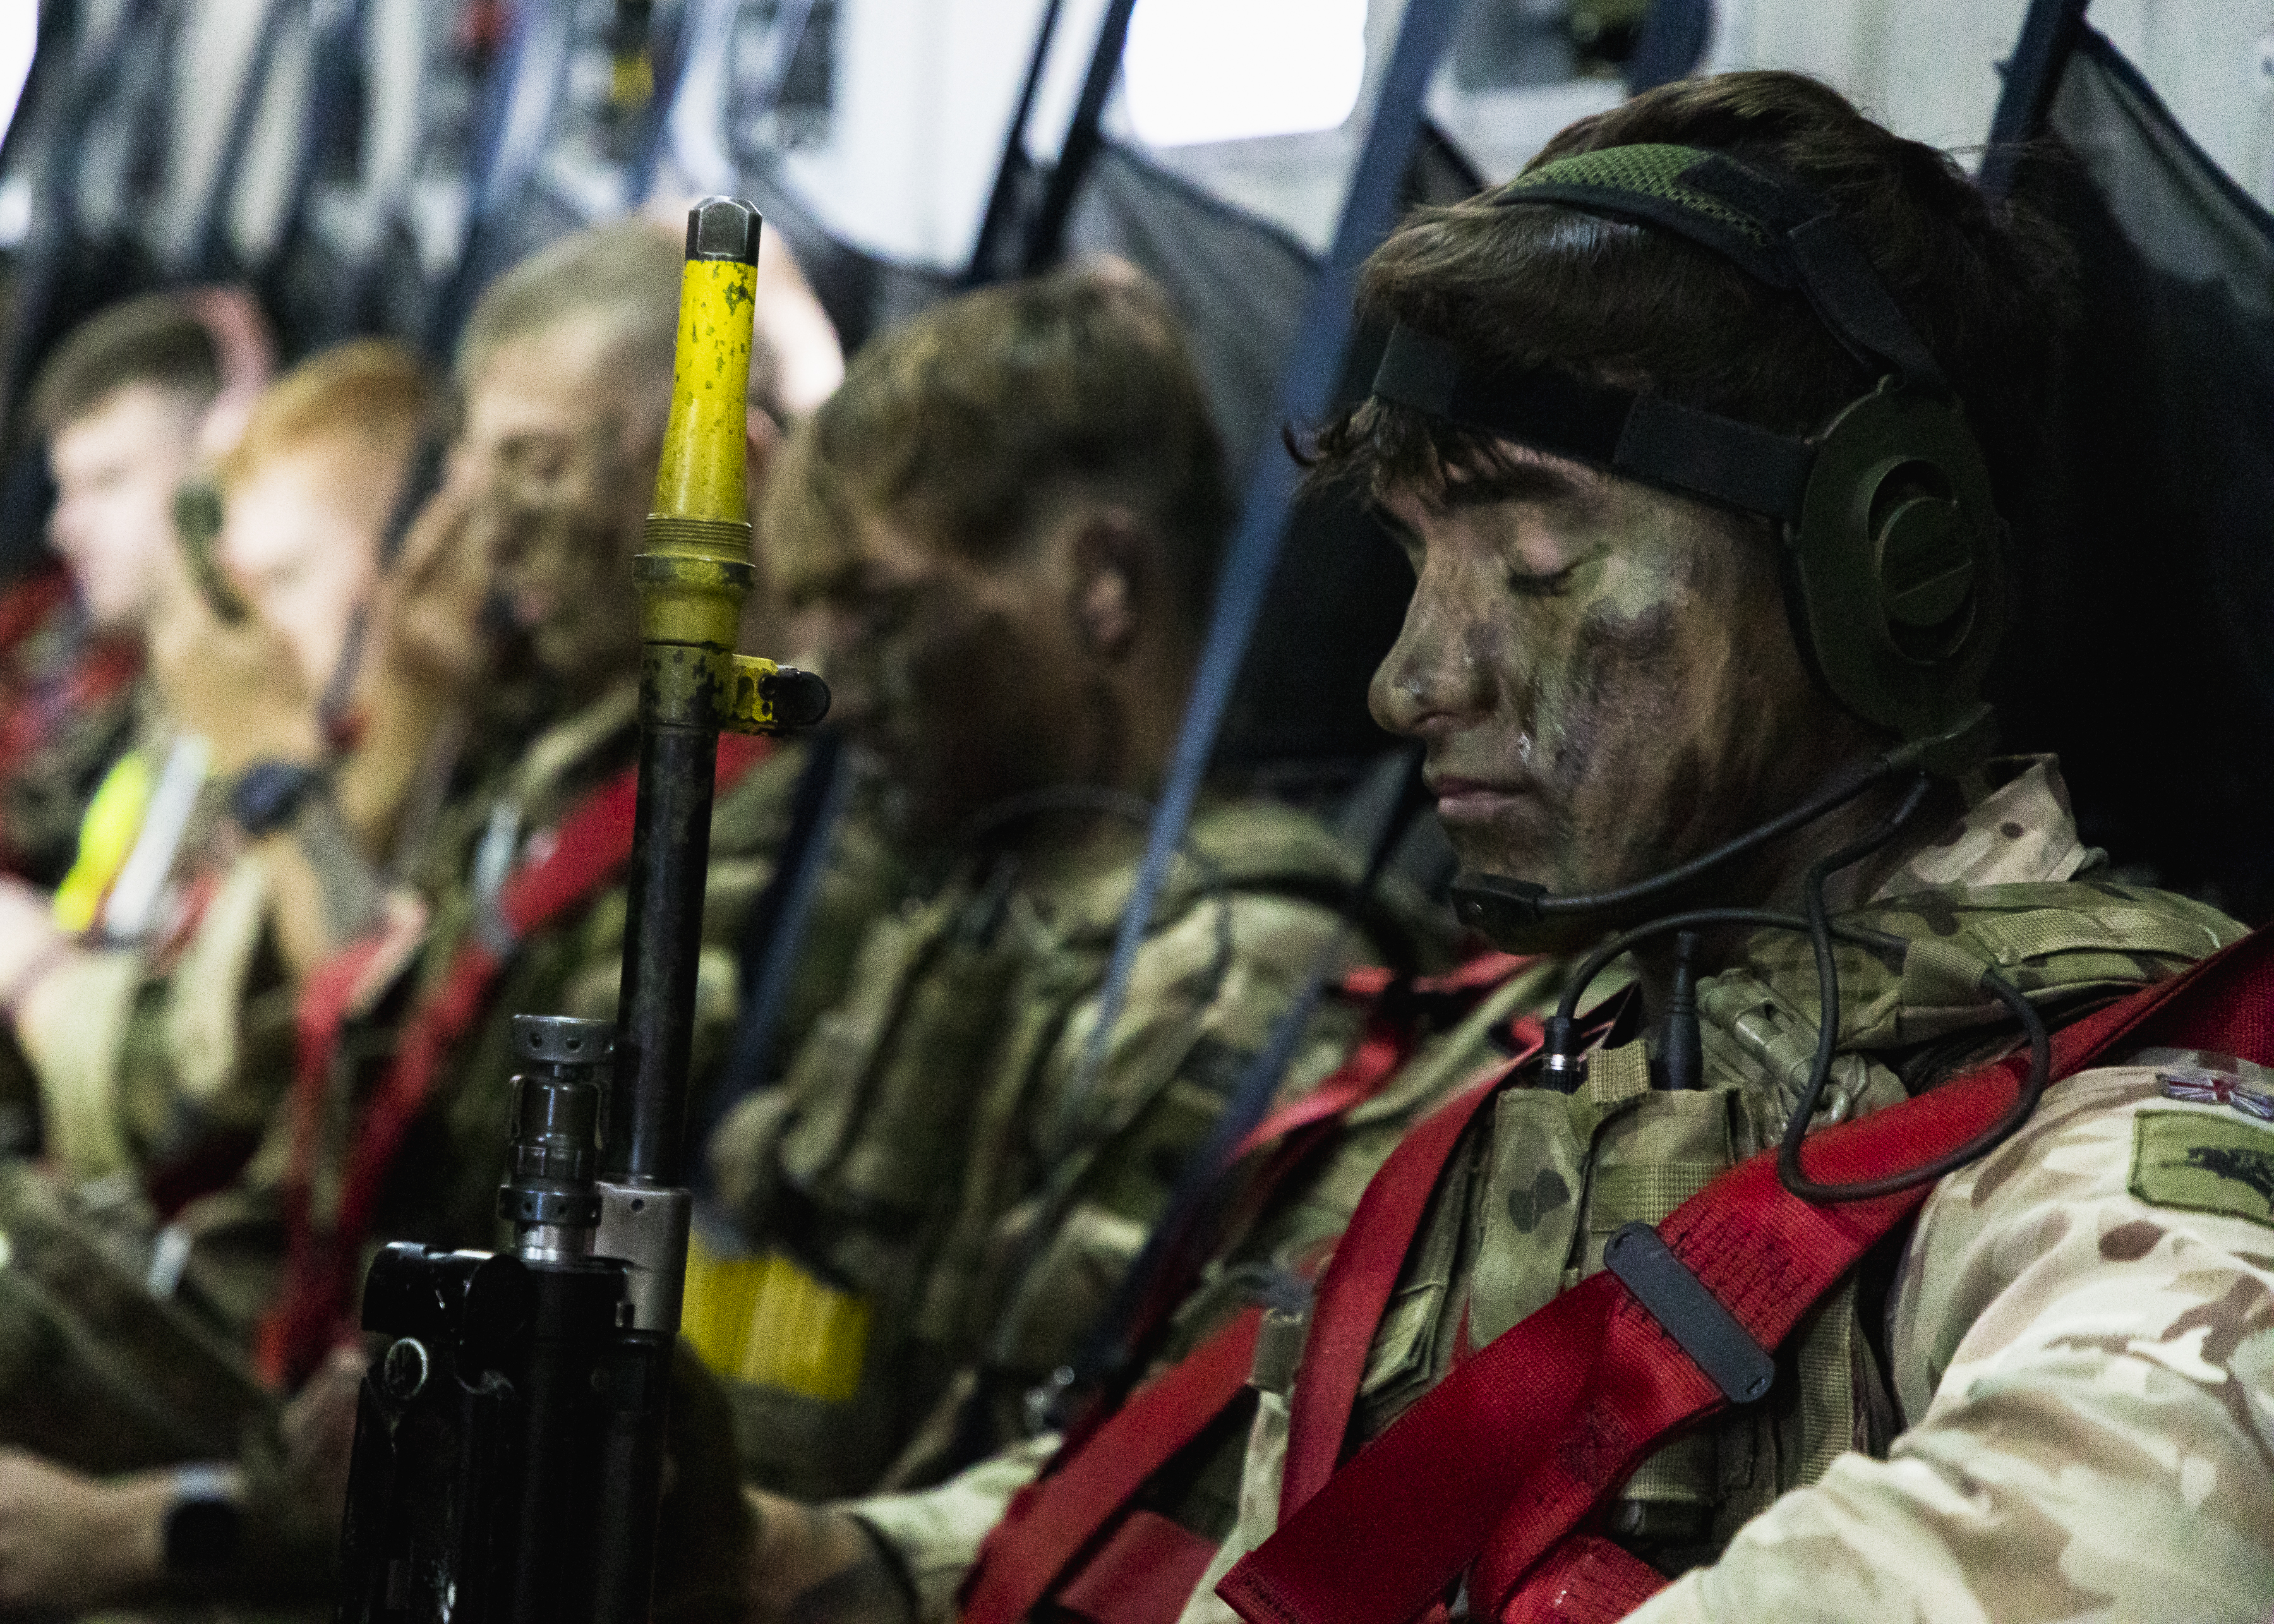 Image shows RAF personnel with face paint and rifles, sitting inside aircraft carrier.